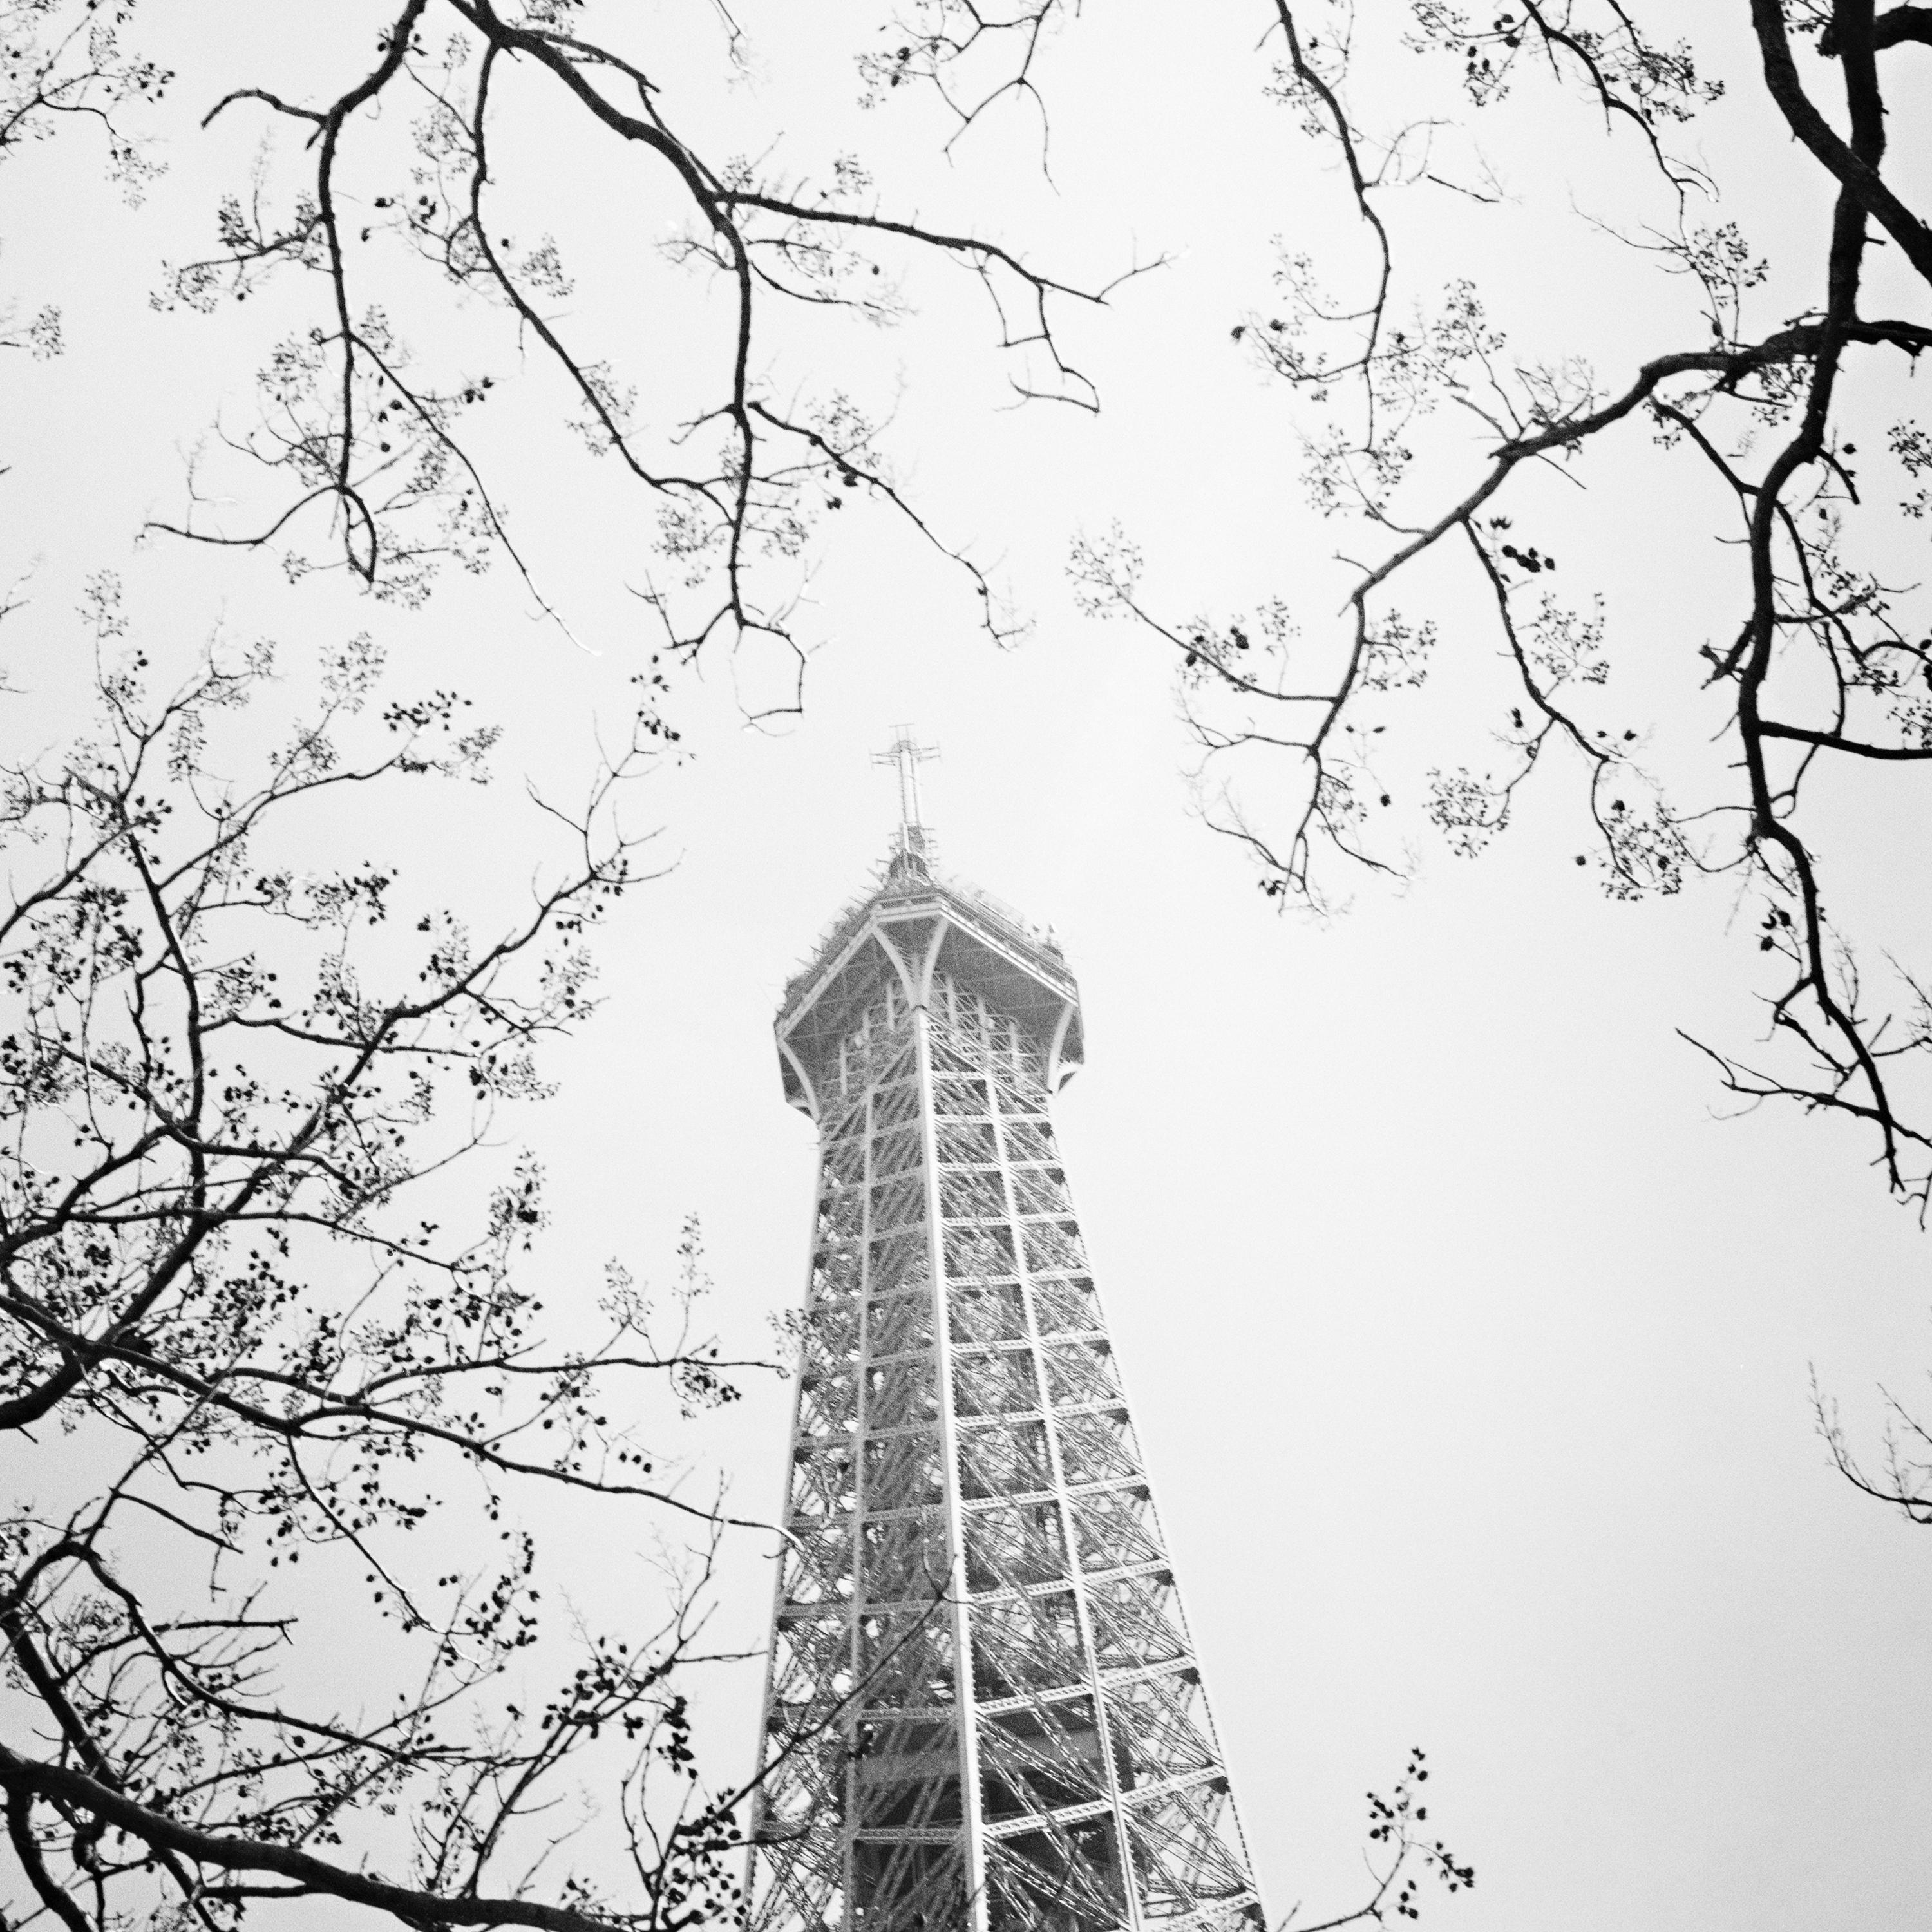 Tree and the Eiffel Tower, Paris, France, black white art landscape photography For Sale 3